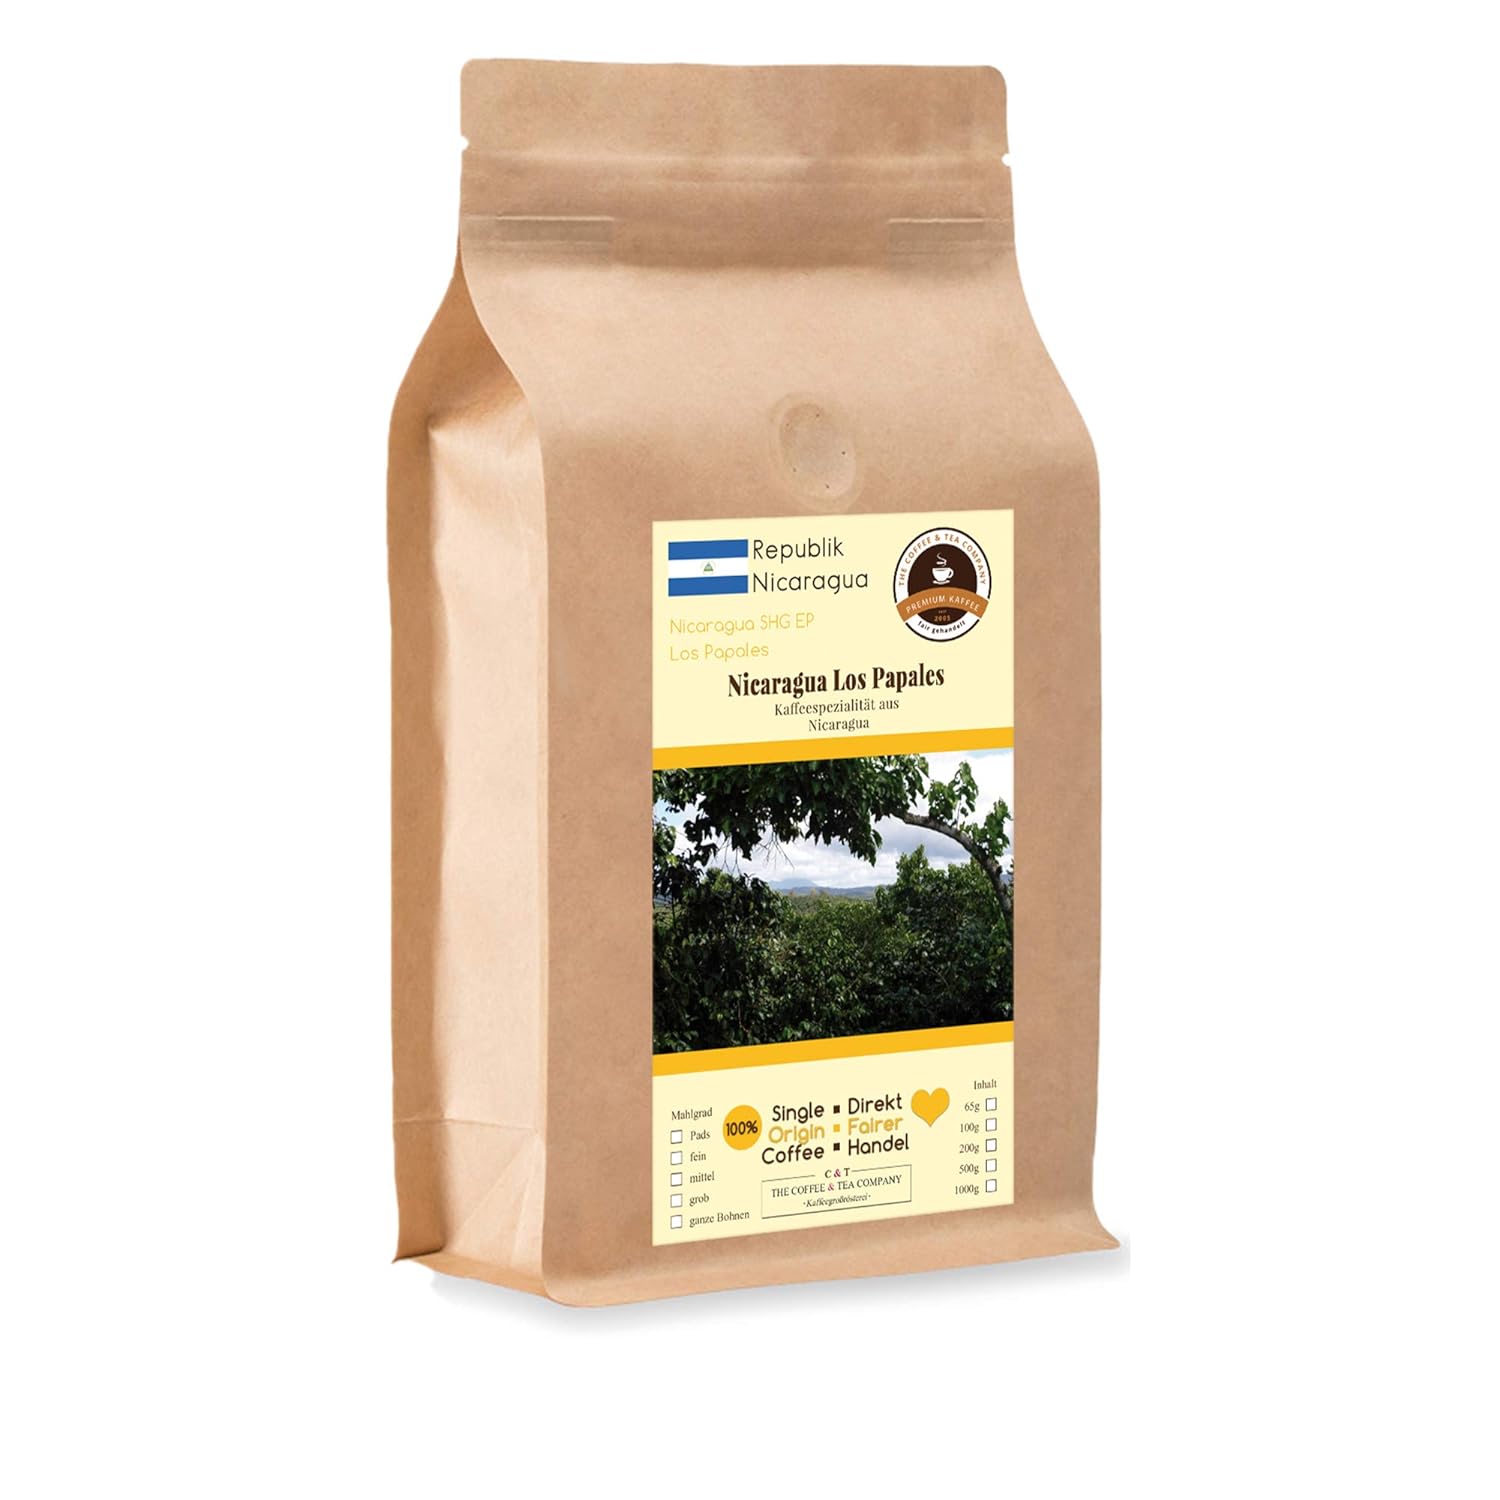 Coffee Globetrotter - Coffee with Heart - Nicaragua Los Papales - 1000 g Whole Bean - for Fully Automatic Coffee - Top Coffee Fair Trade Supports Social Projects